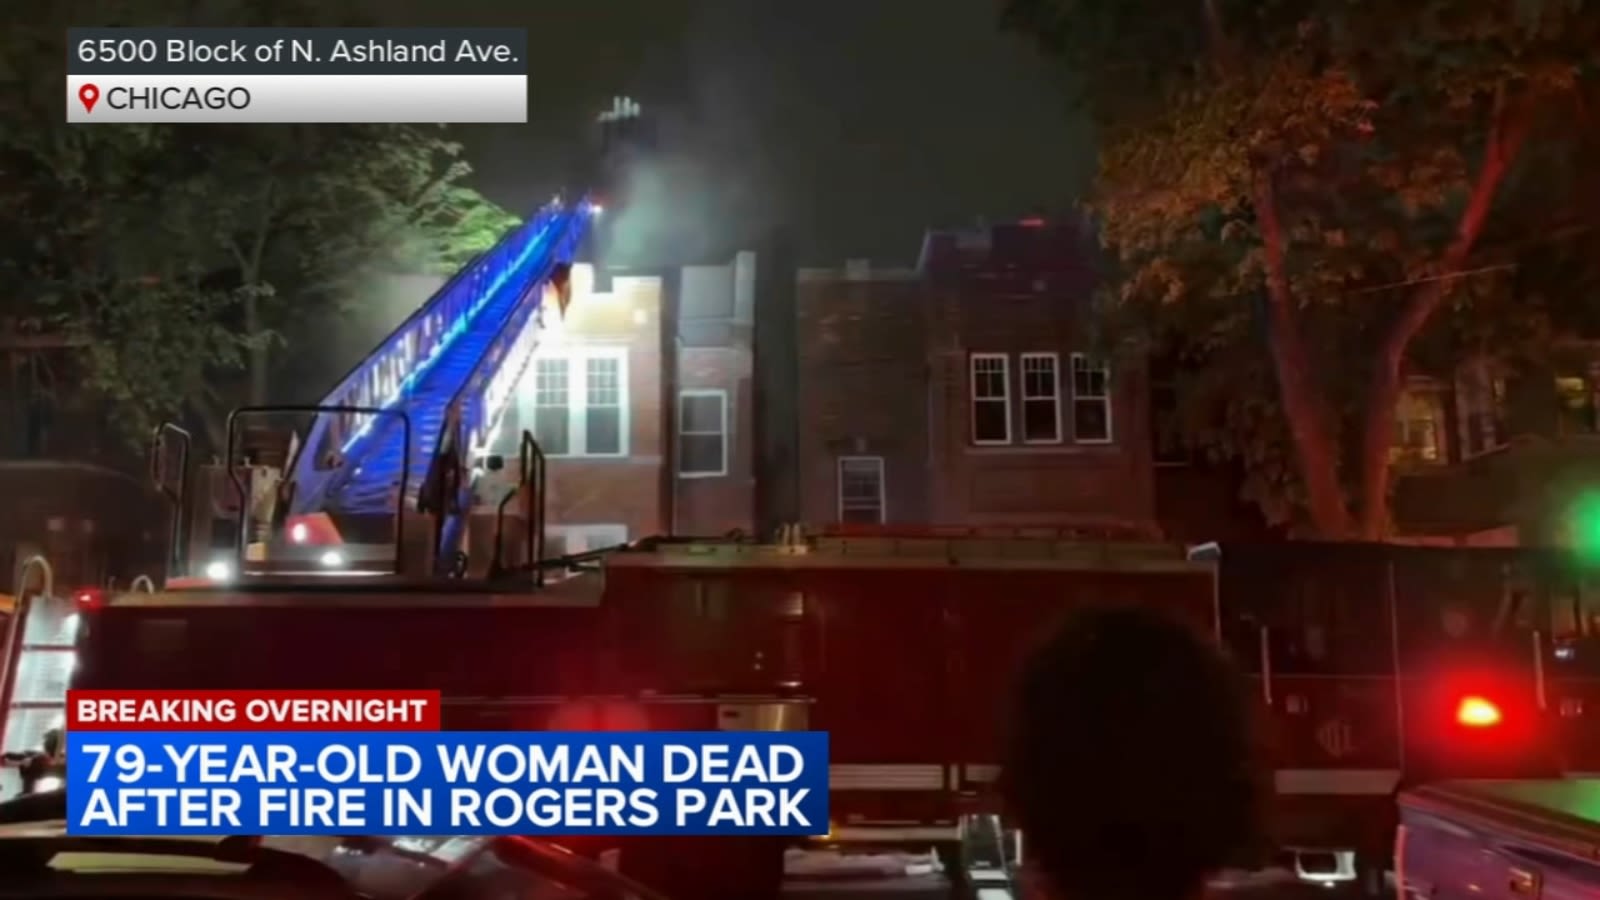 79-year-old woman killed in Rogers Park apartment fire ID'd, Chicago authorities say